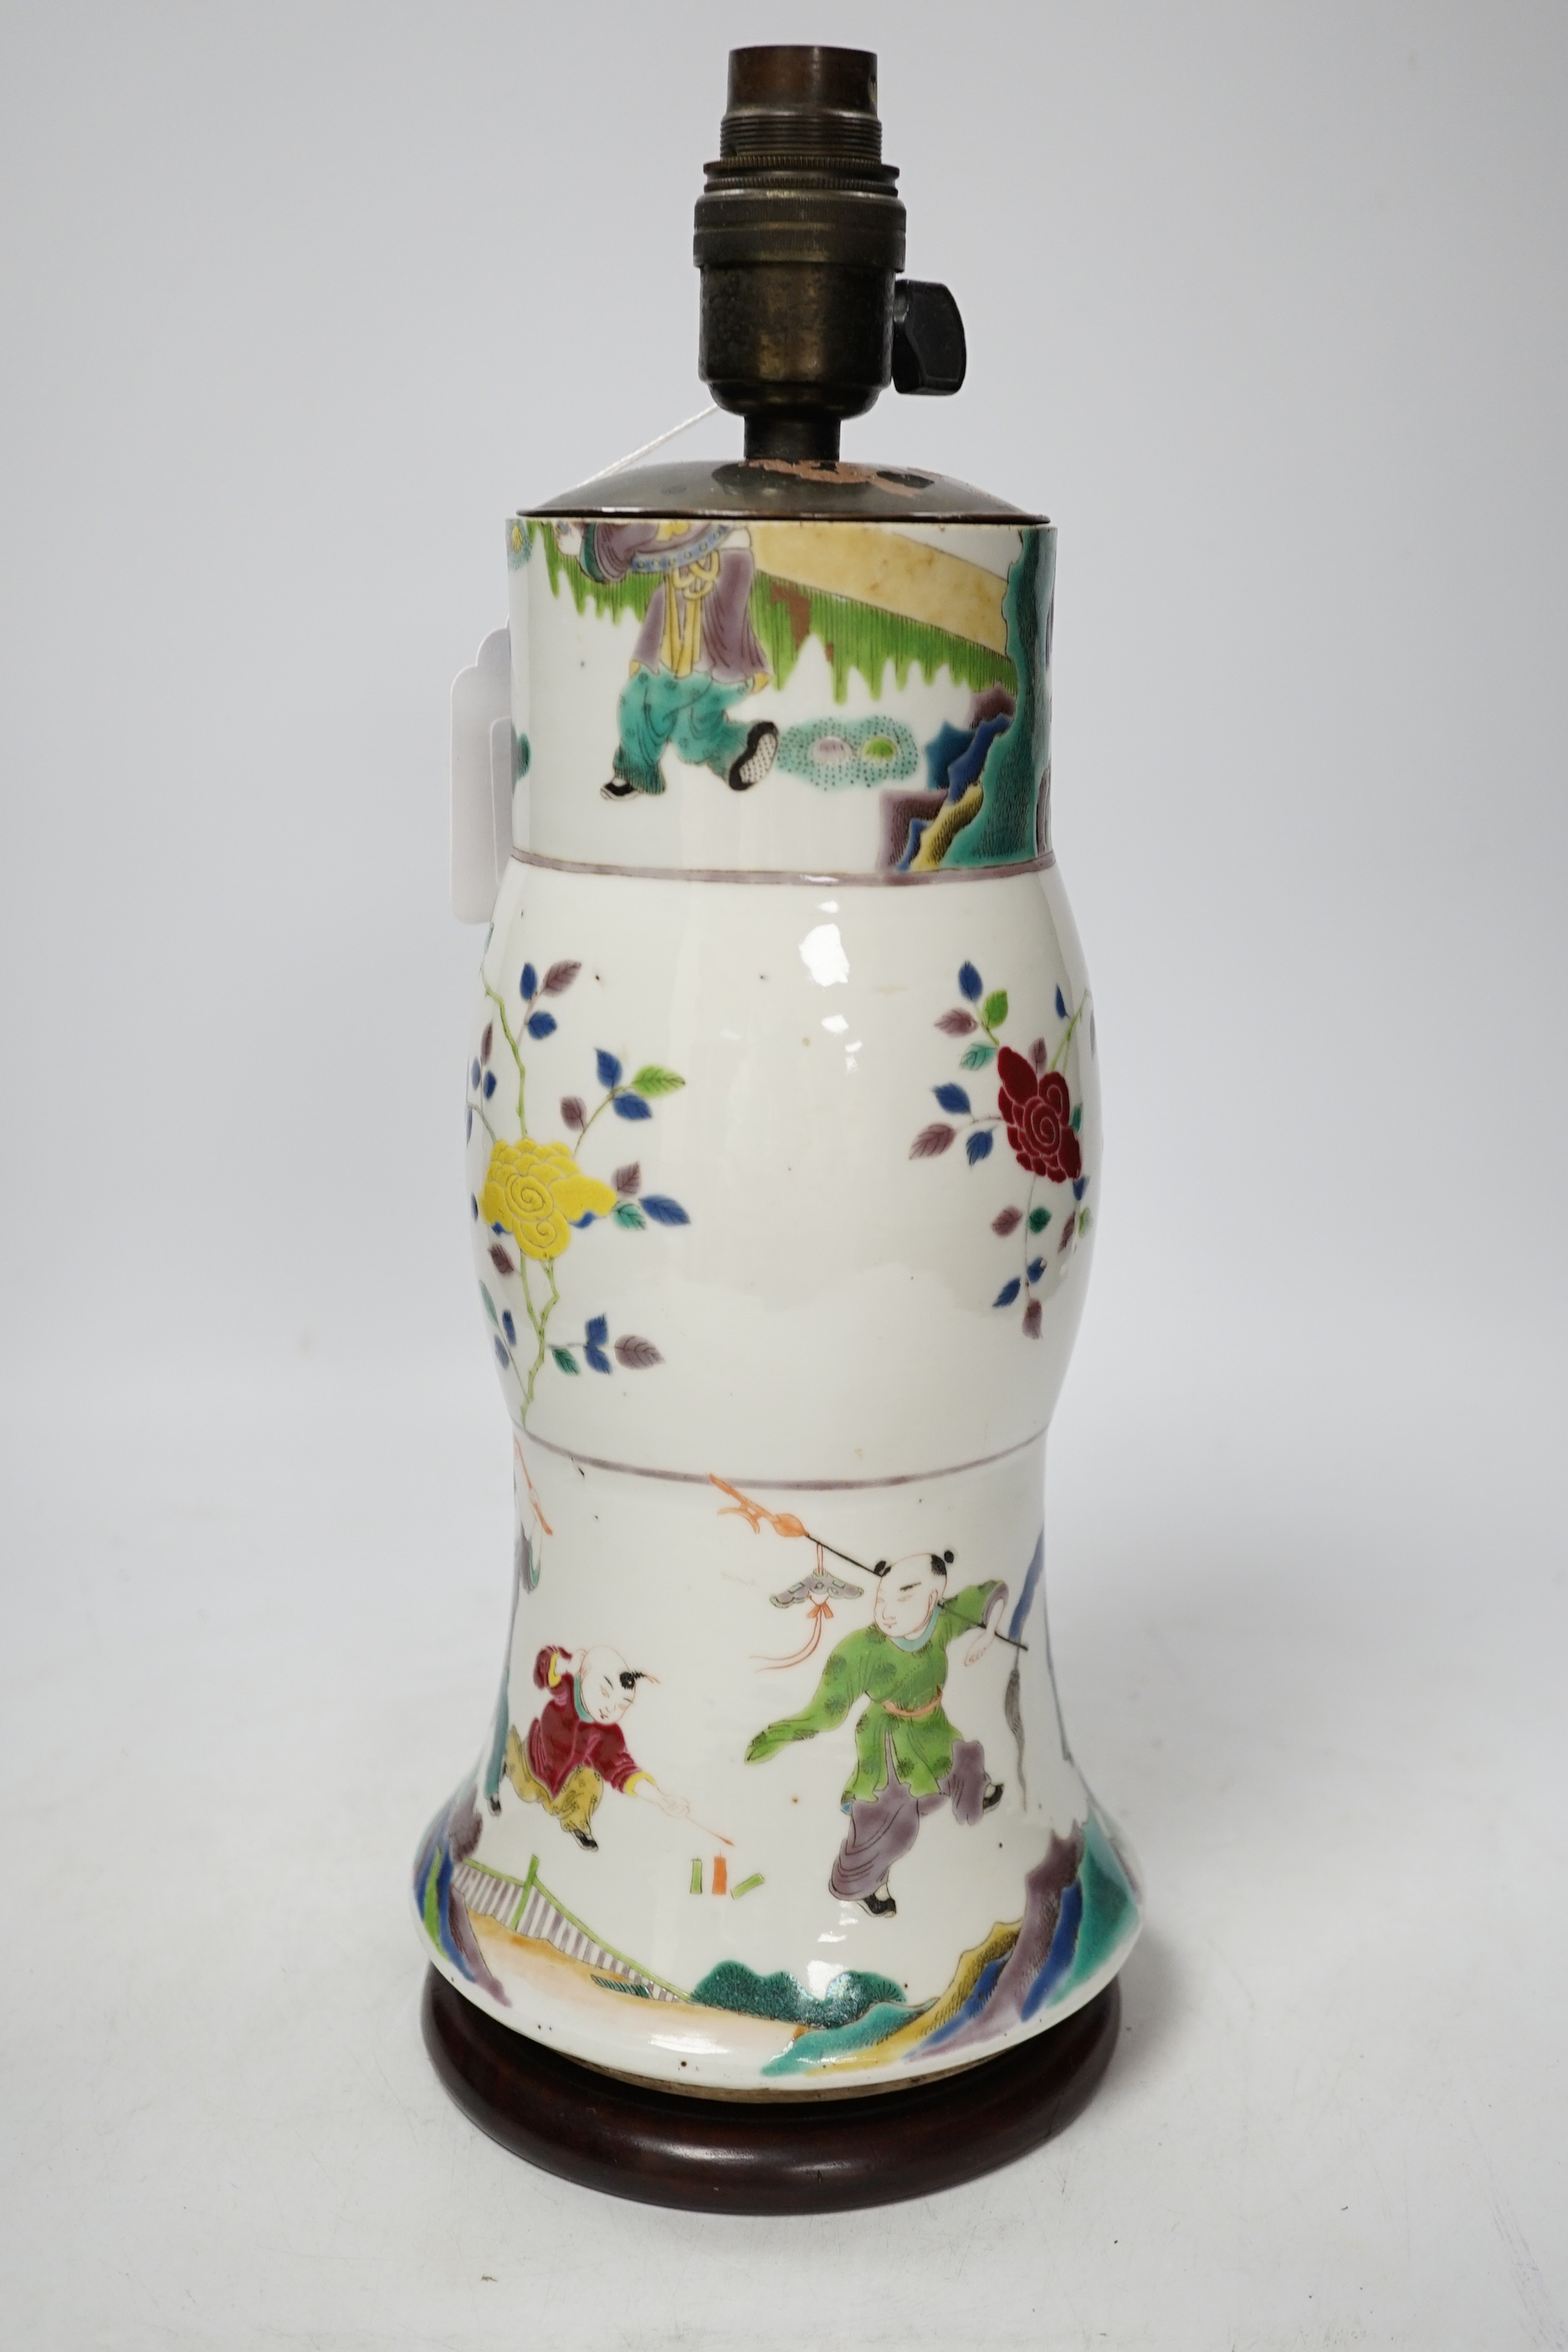 An early 19th century Chinese famille rose gu vase, converted to a lamp, reduced, apocryphal Kangxi mark, overall 35cm high